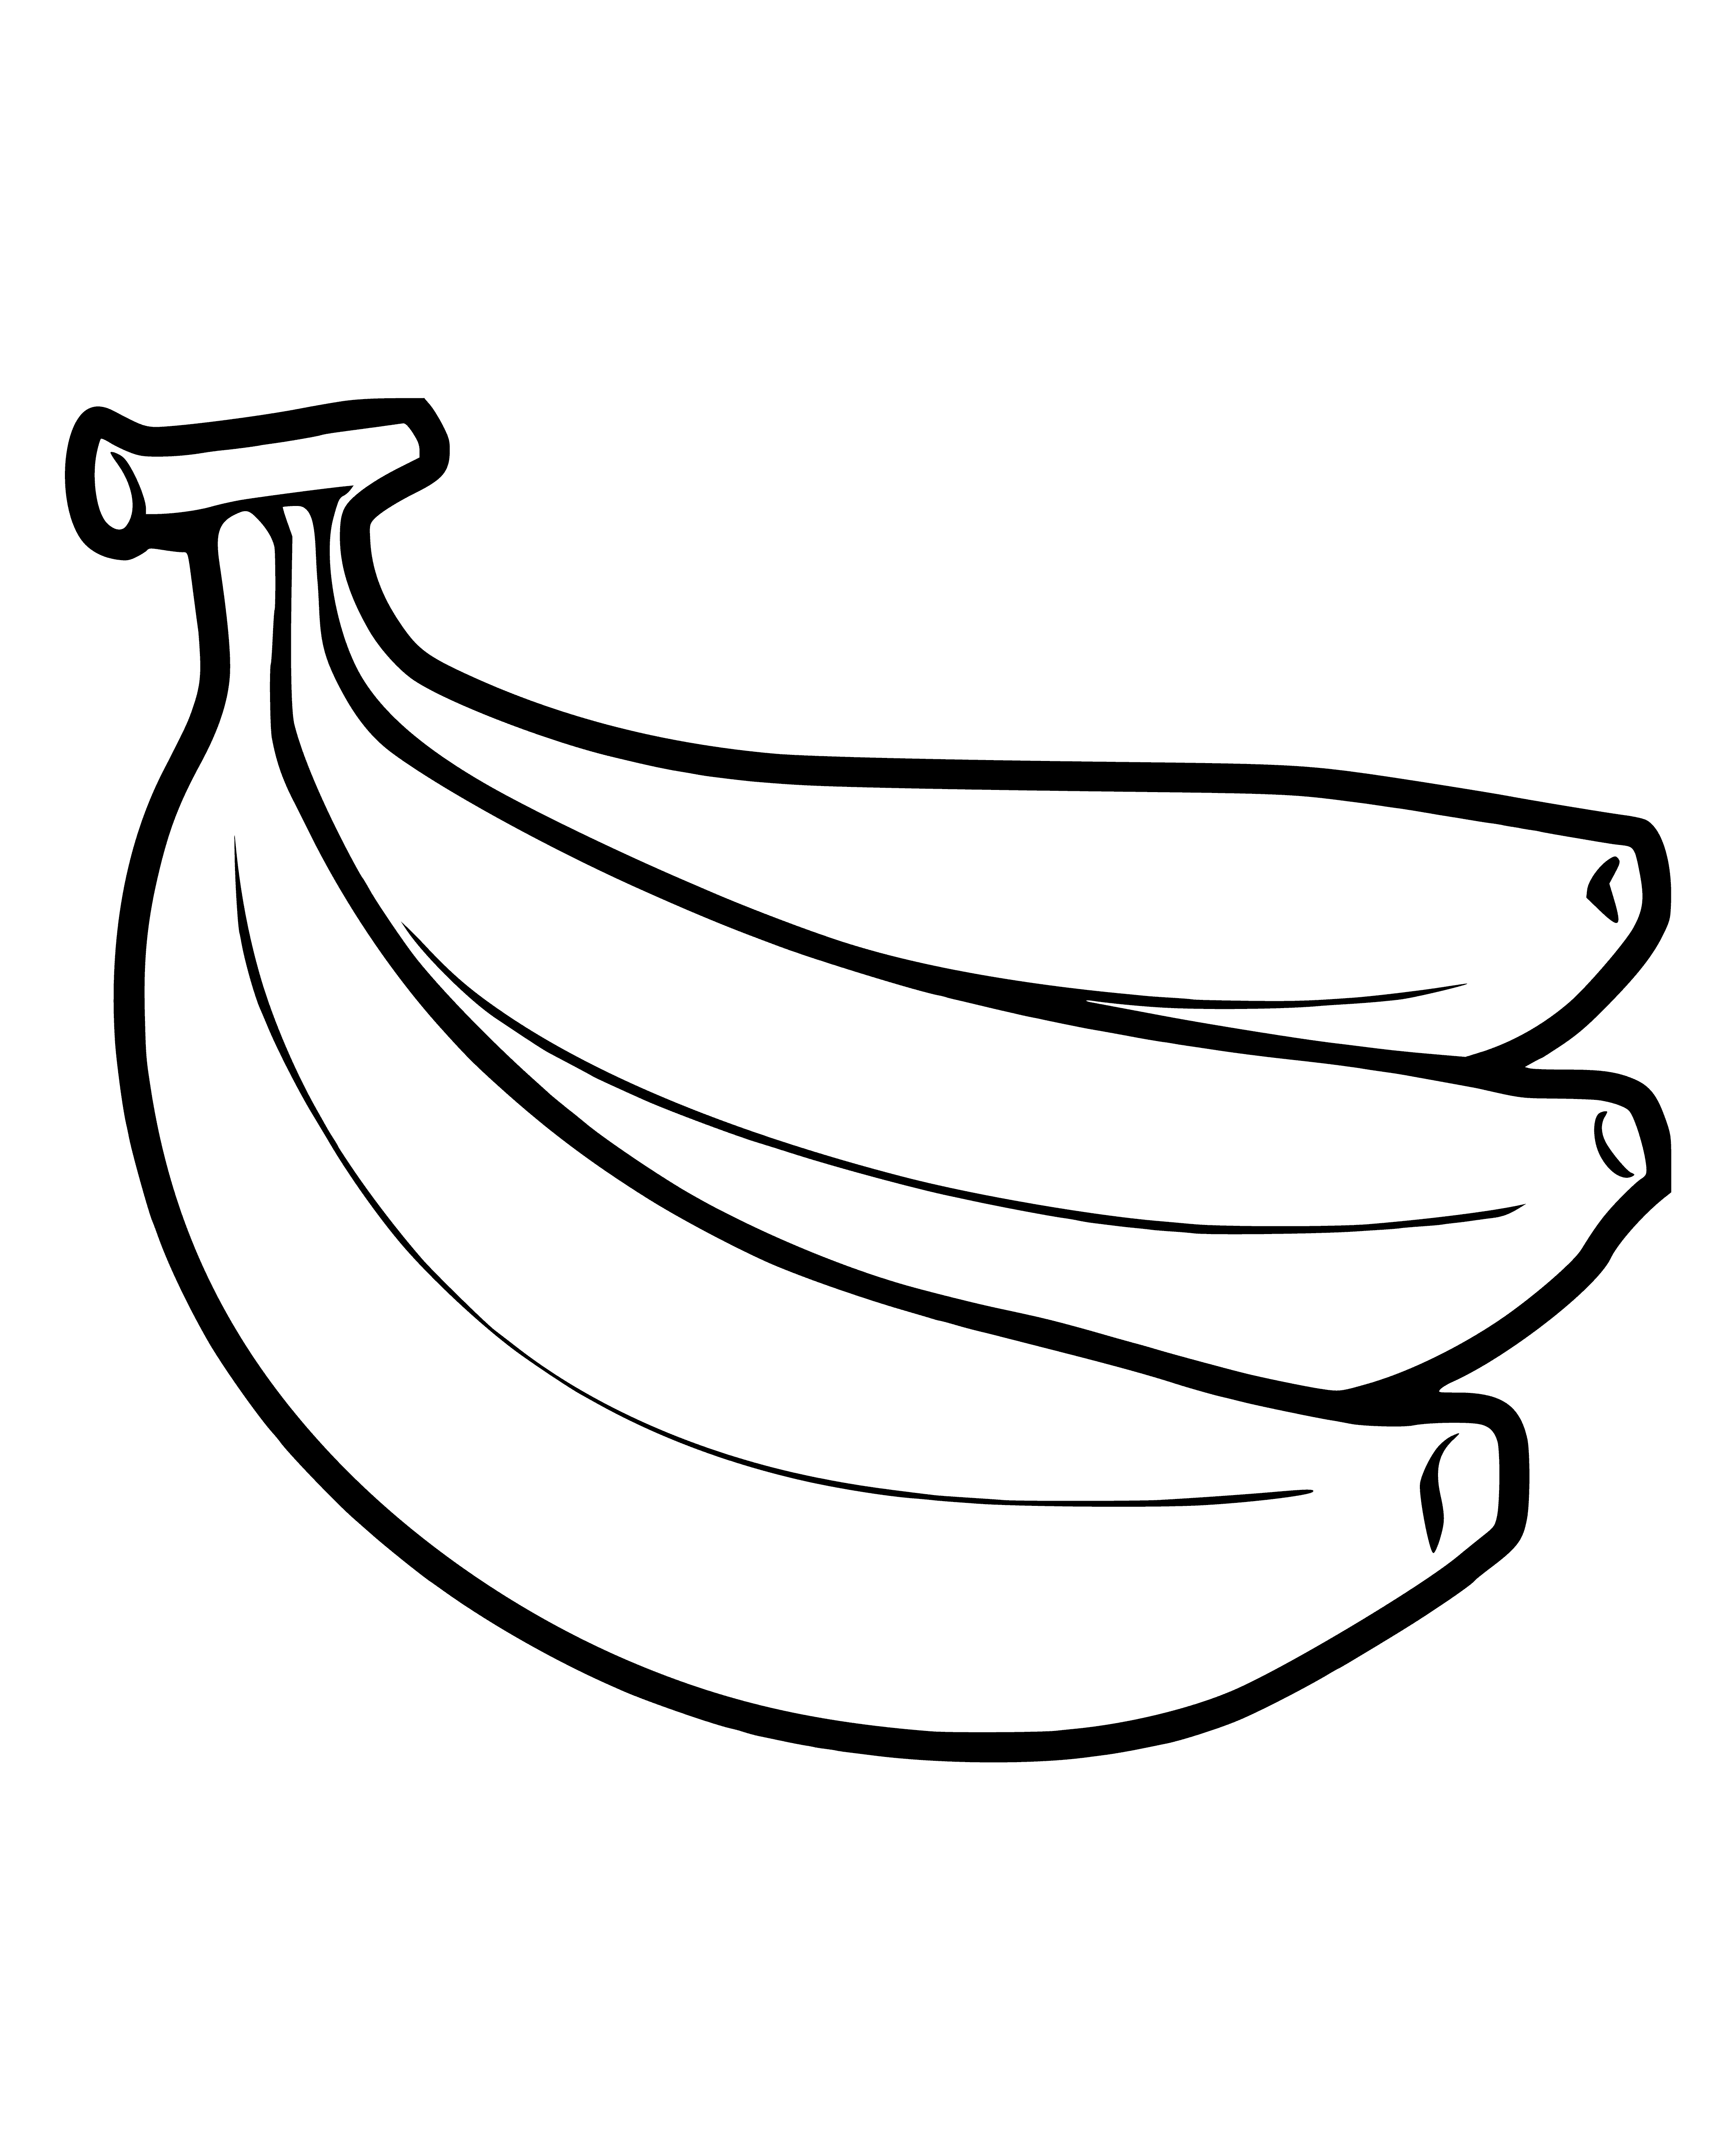 Bunch of bananas coloring page